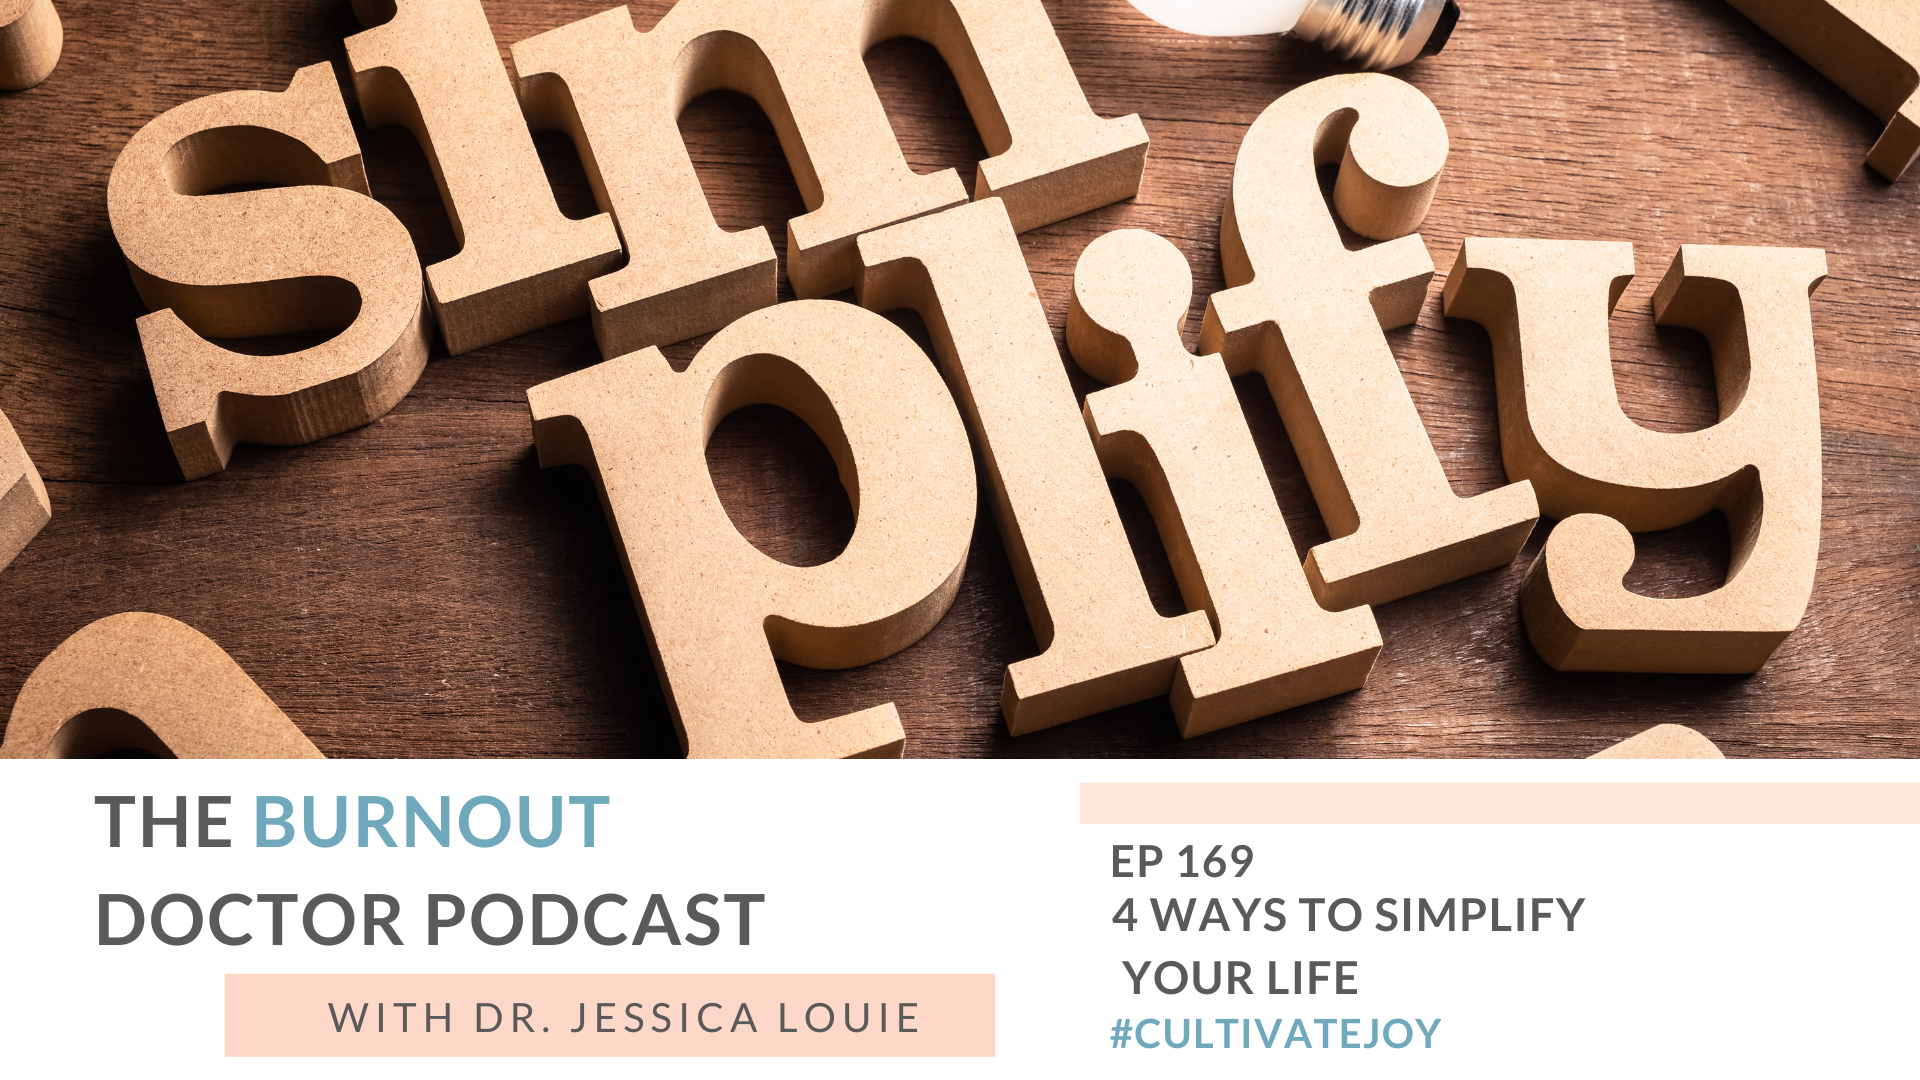 Random things I do to simplify my life. 4 ways to simplify your life with the KonMari Method. Pharmacist burnout. The Burnout Doctor Podcast. Dr. Jessica Louie